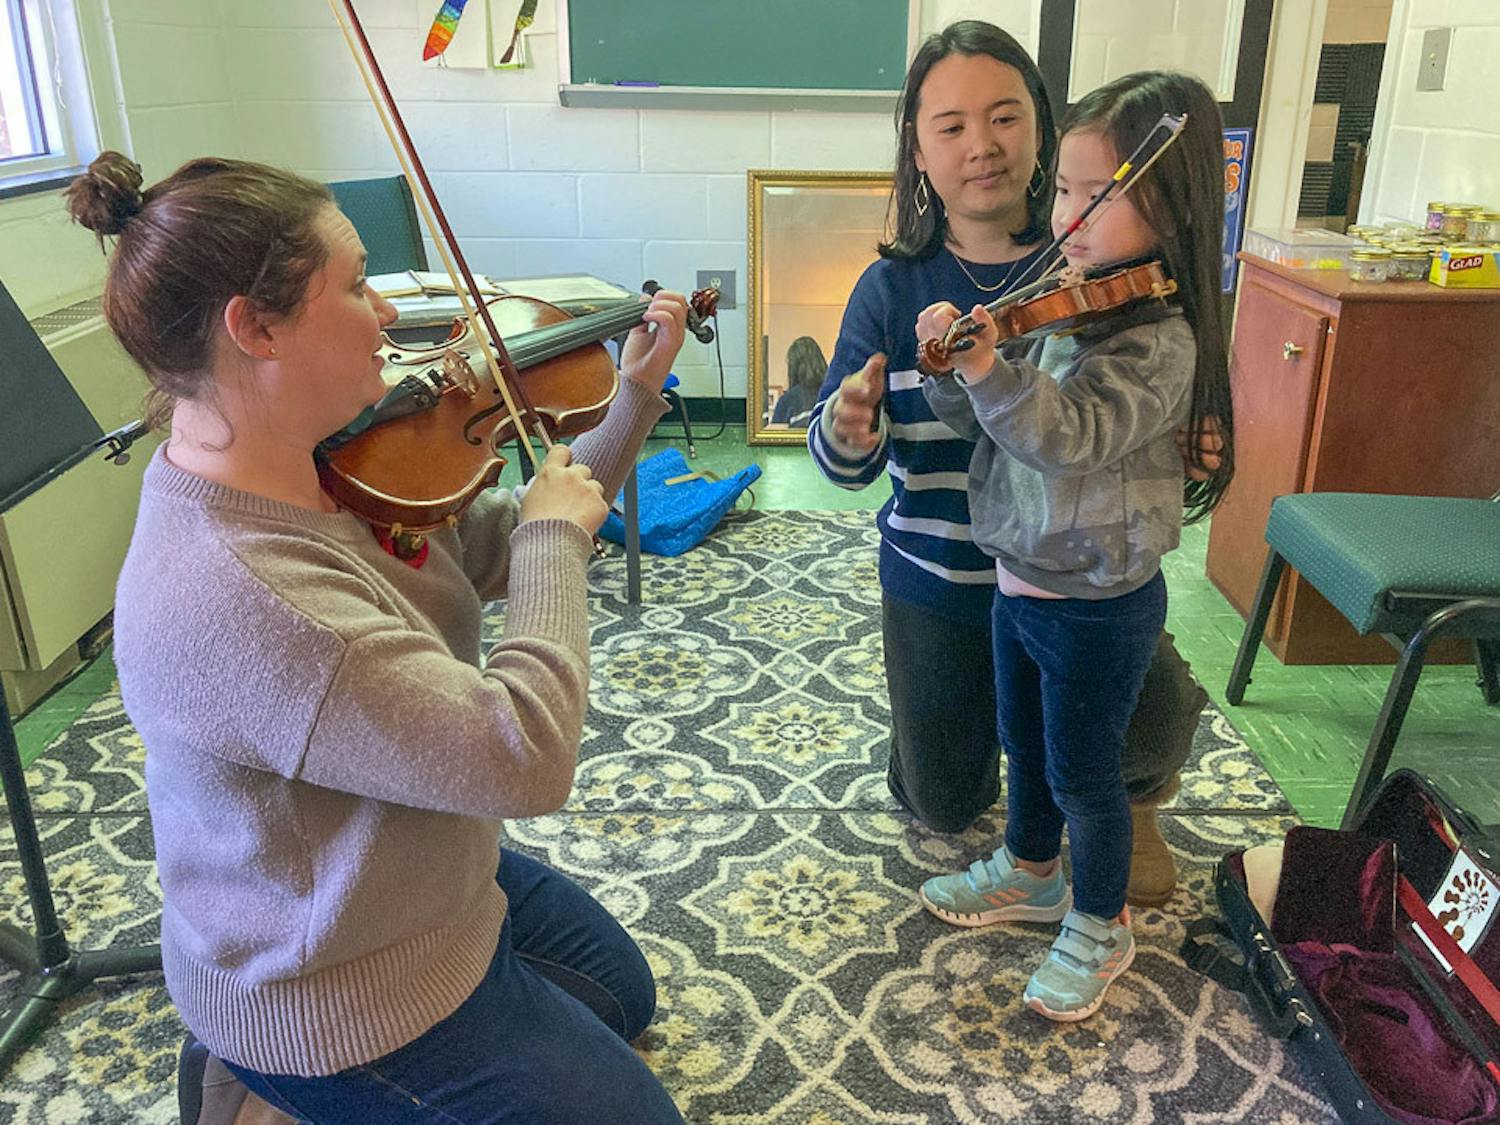 Violinist Jessica Rafferty (left) teaches a violin lesson to a student (right), as her mother helps her. The Suzuki Academy is a non-profit organization that teaches children how to play music from a young age.